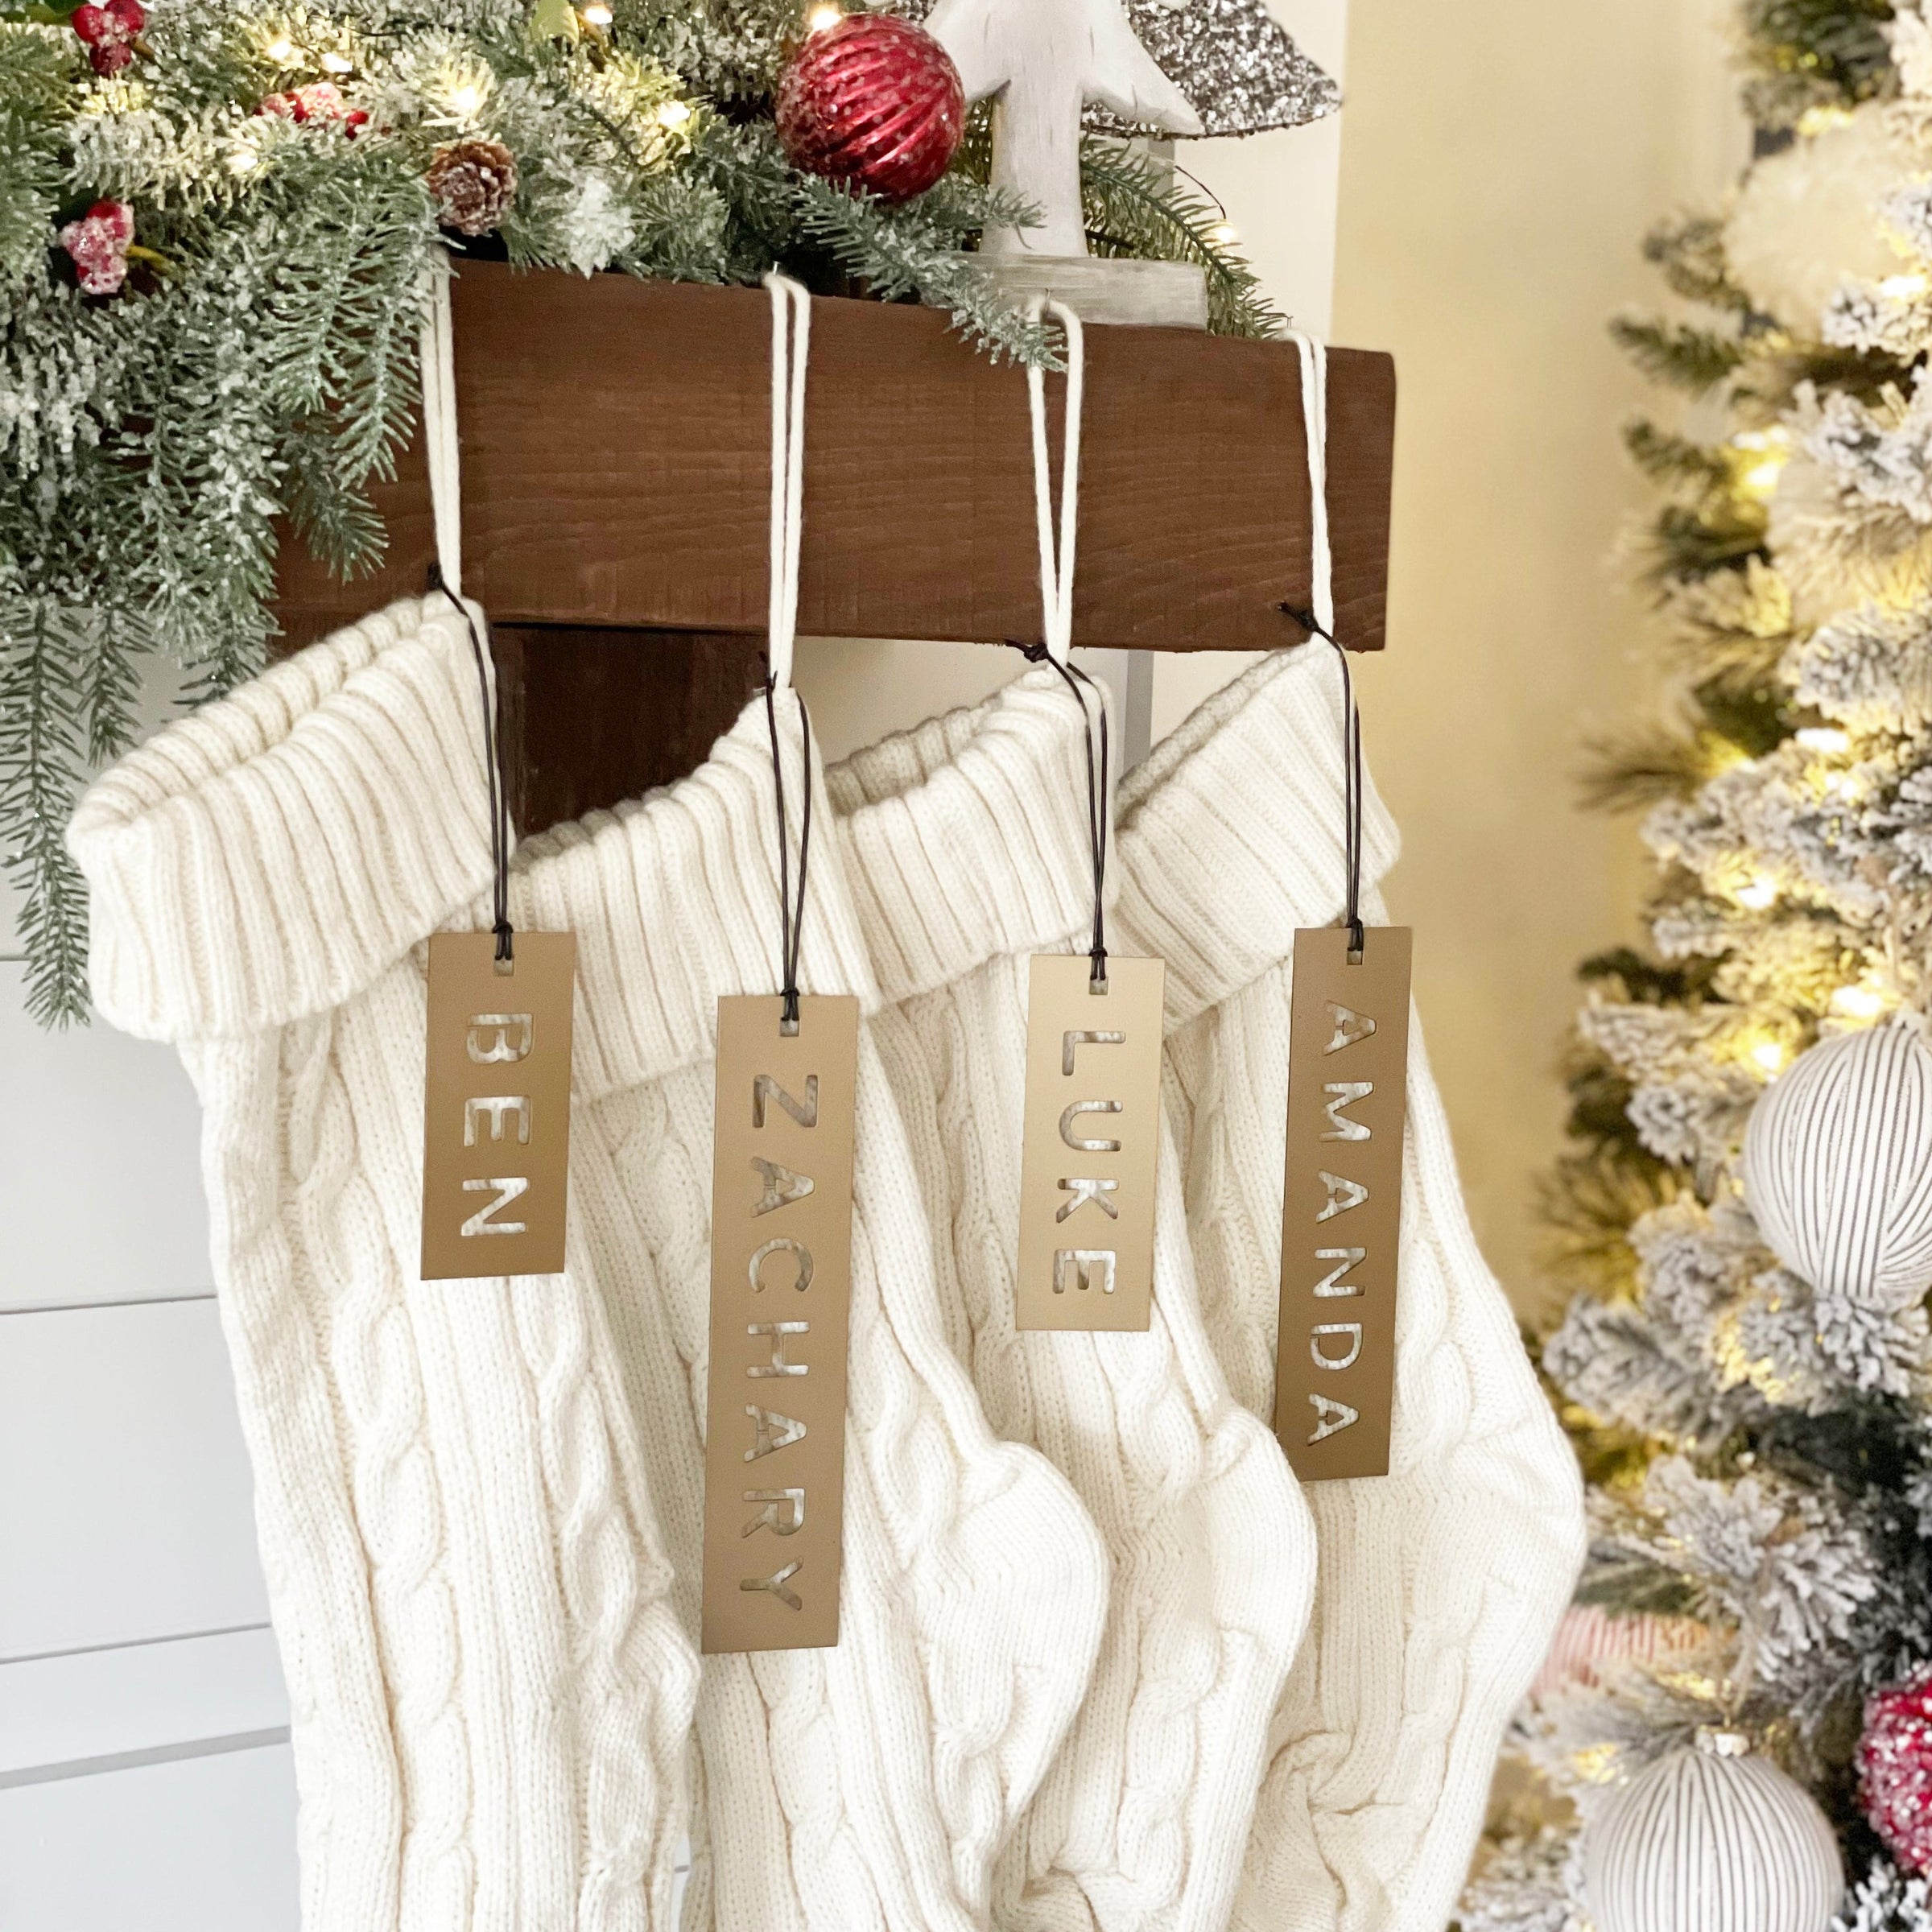 Personalised Christmas Stocking Name Tags, Personalized Gift Tags,  Personalized Stocking Name Tags, Tree Ornament, Wood Name Gift Tags 